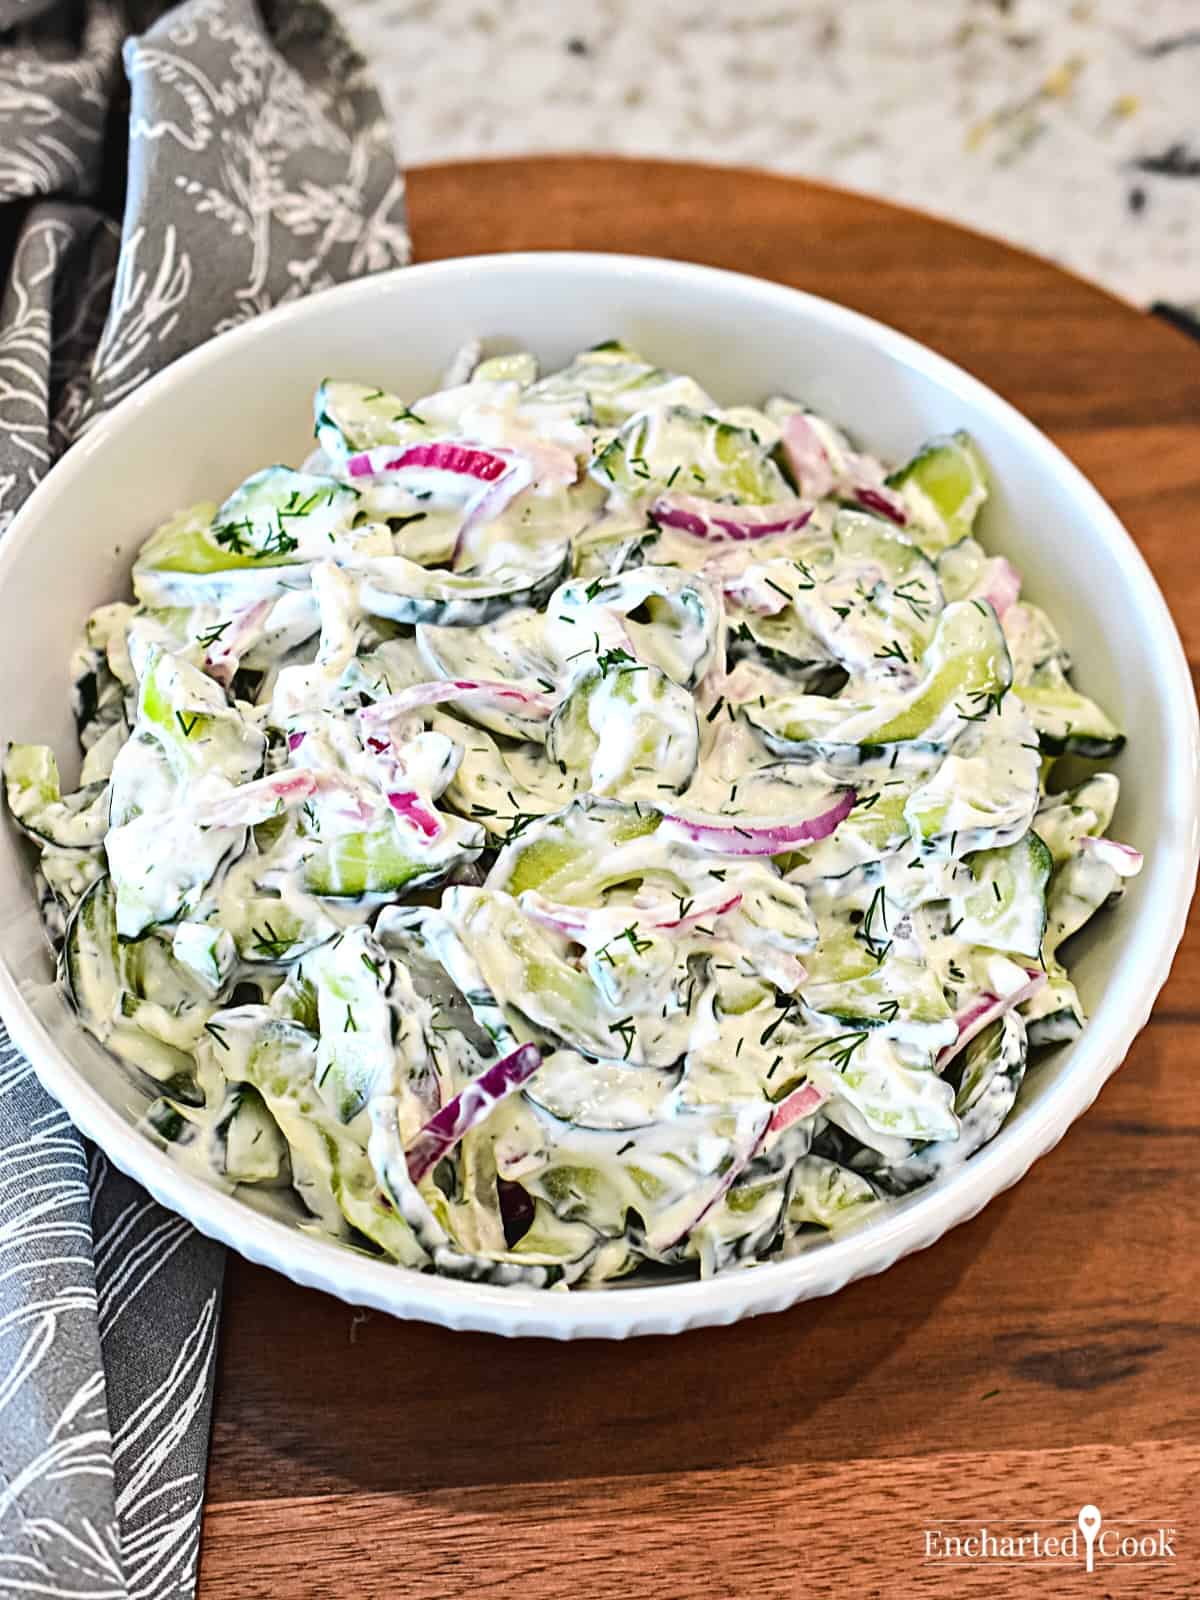 Sliced cucumber and red onion in a creamy dressing in a white bowl on a wooden board.